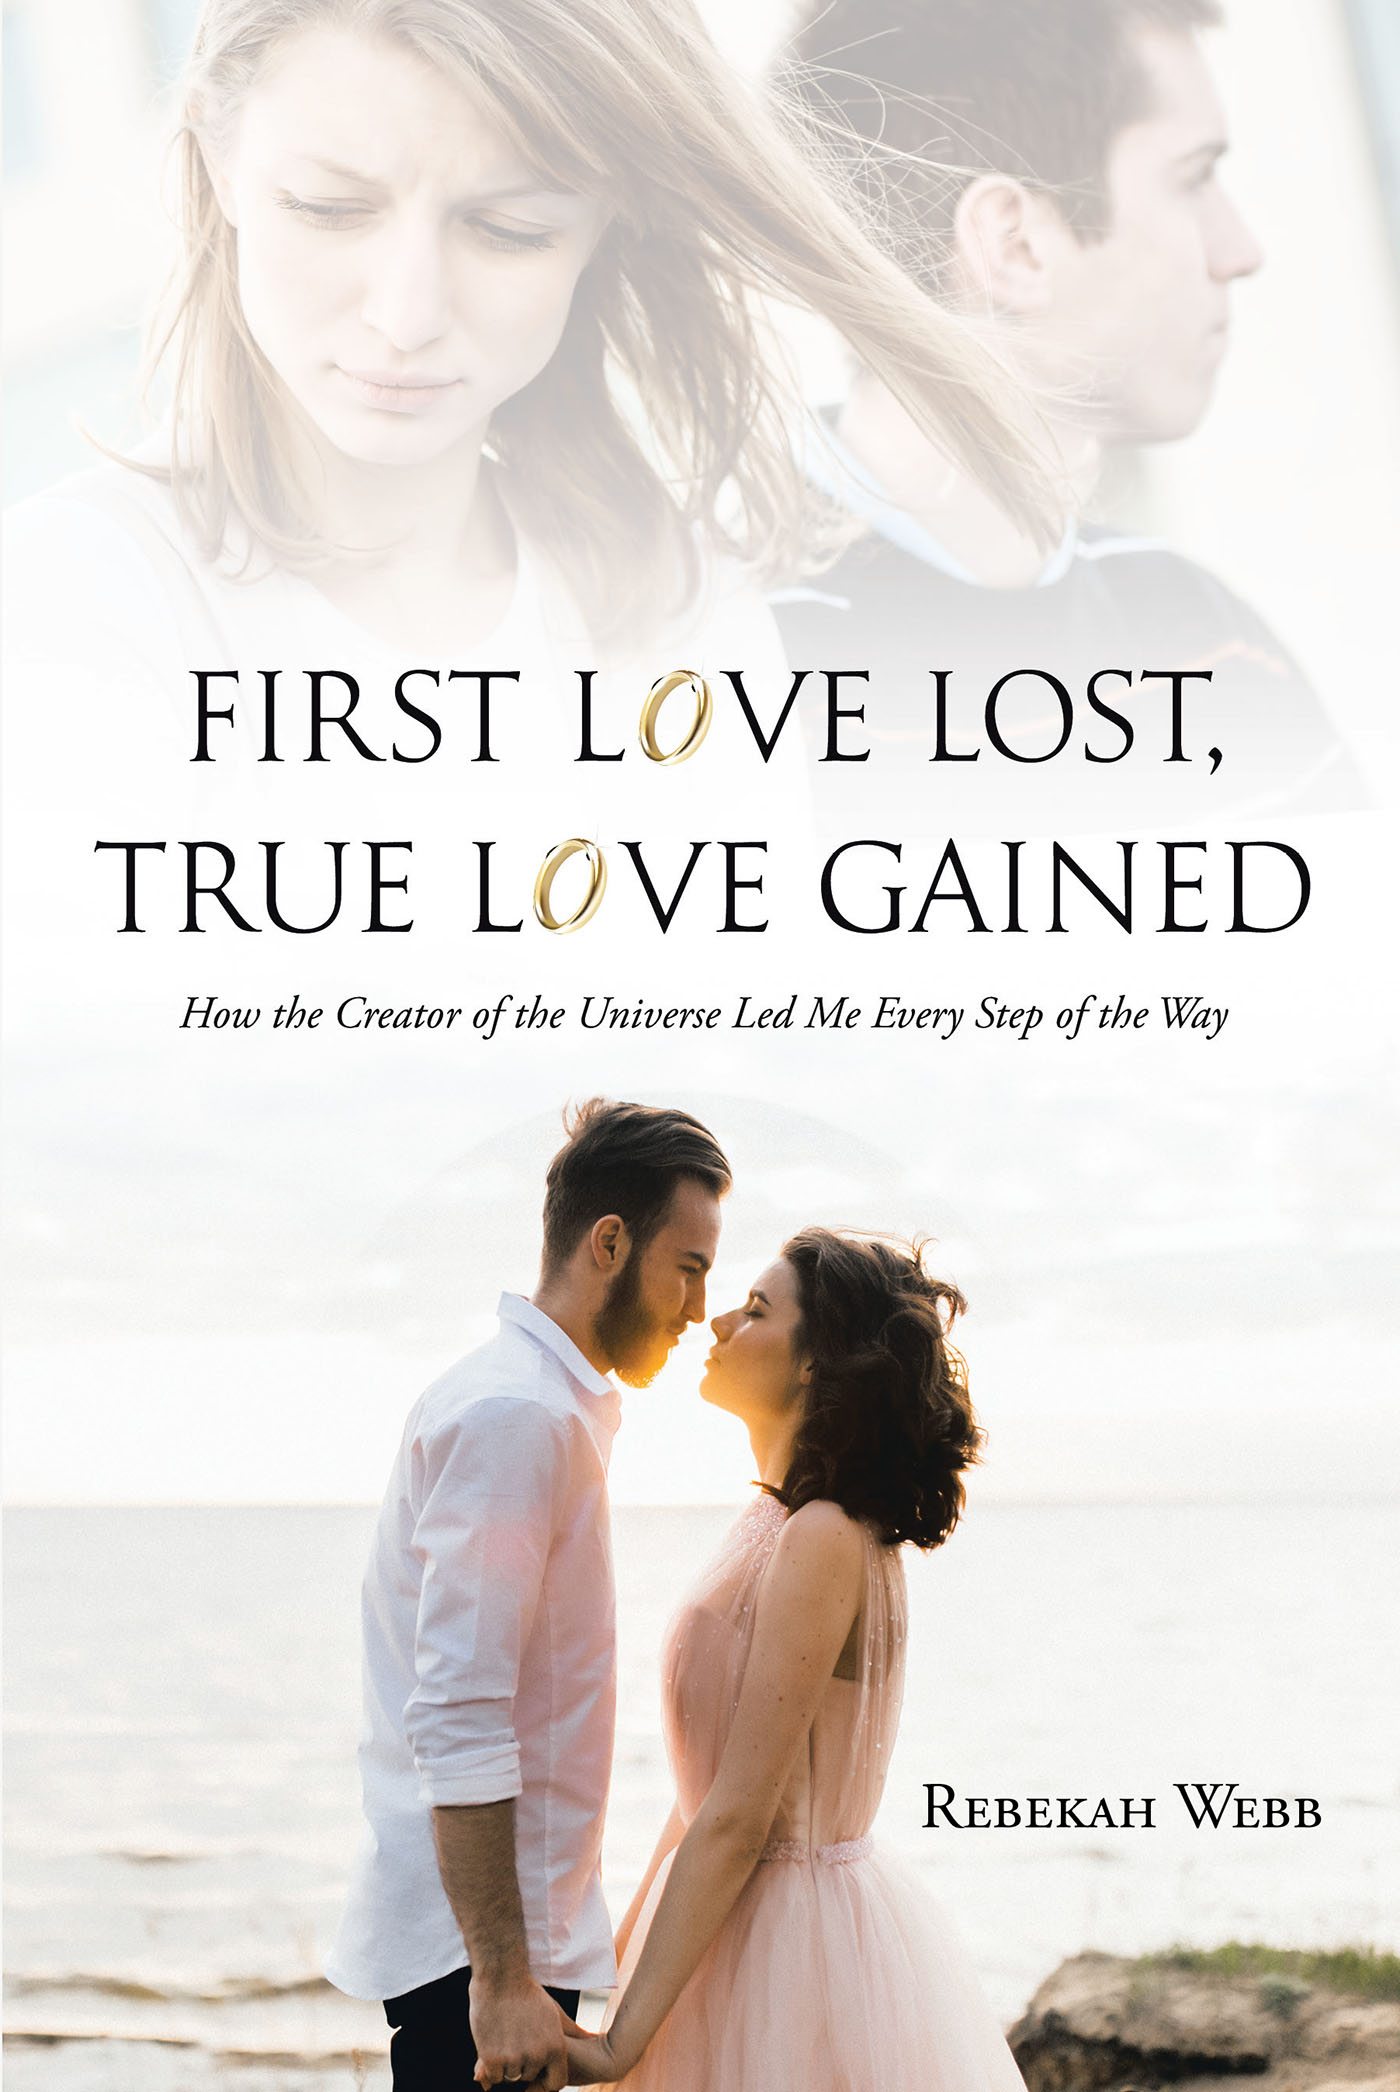 Rebekah Webb’s Newly Released "First Love Lost, True Love Gained: How the Creator of the Universe Led Me Every Step of the Way" is an Encouraging Message of True Love